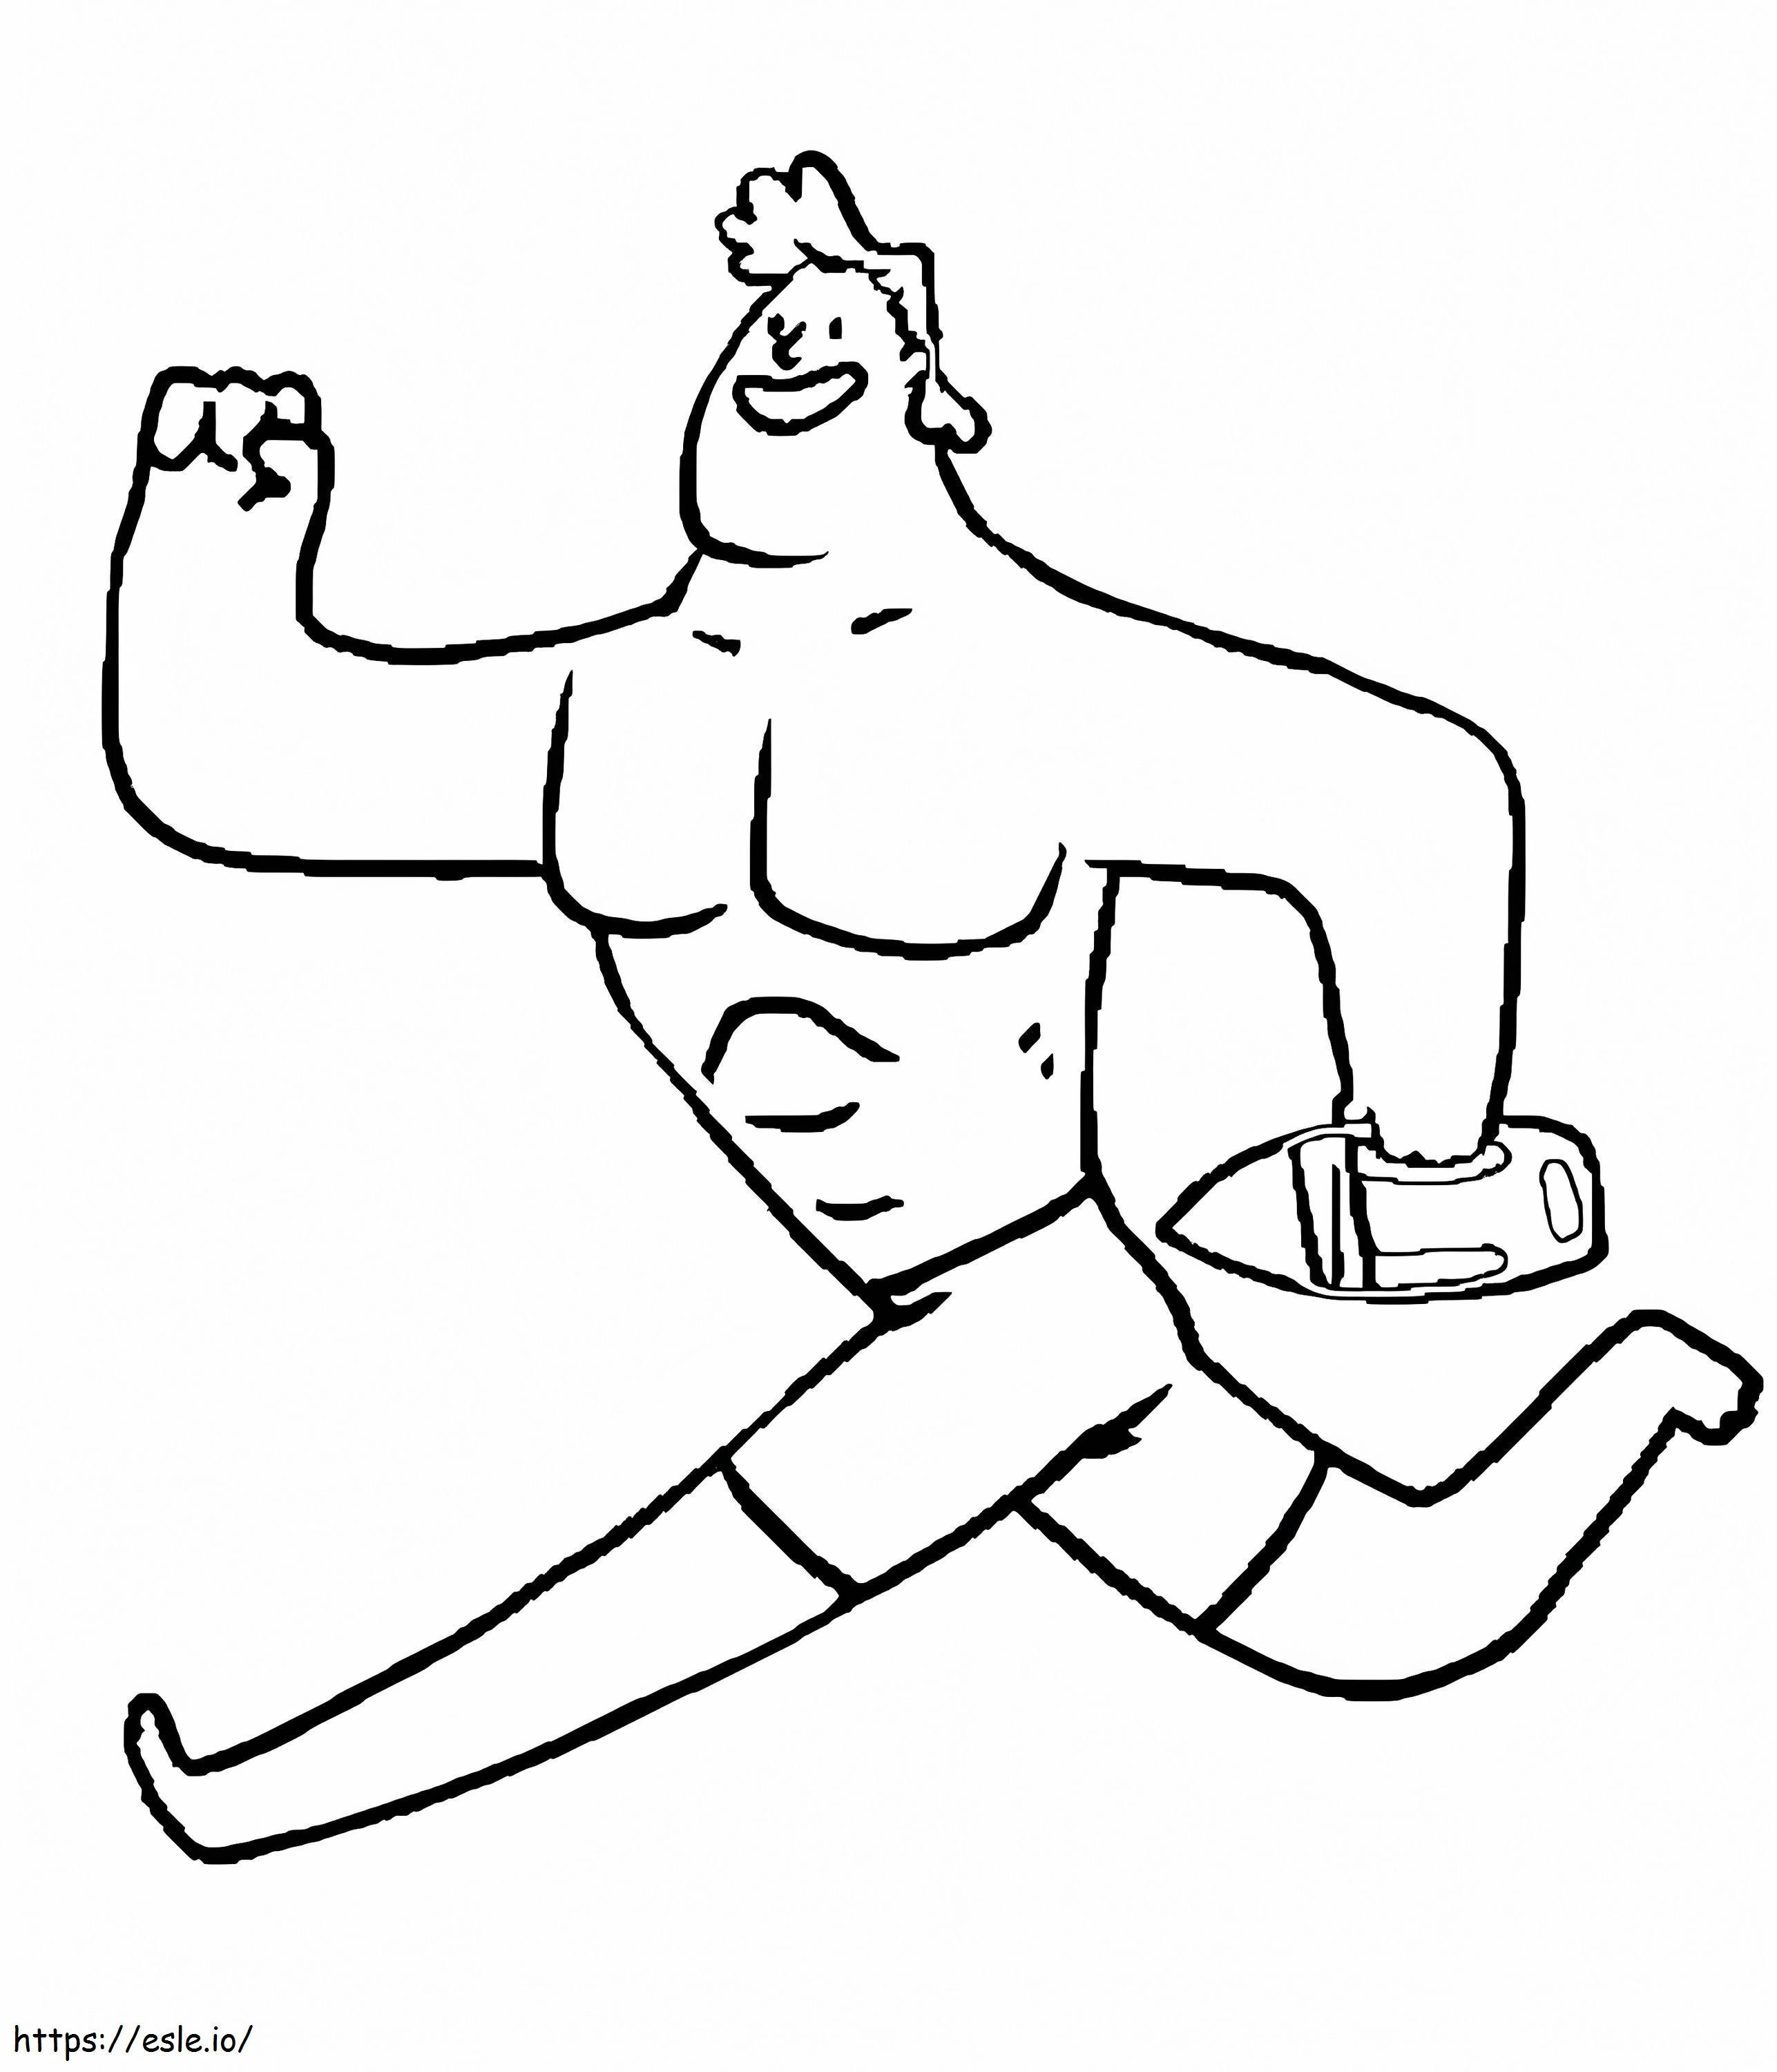 Lifeguard Running coloring page